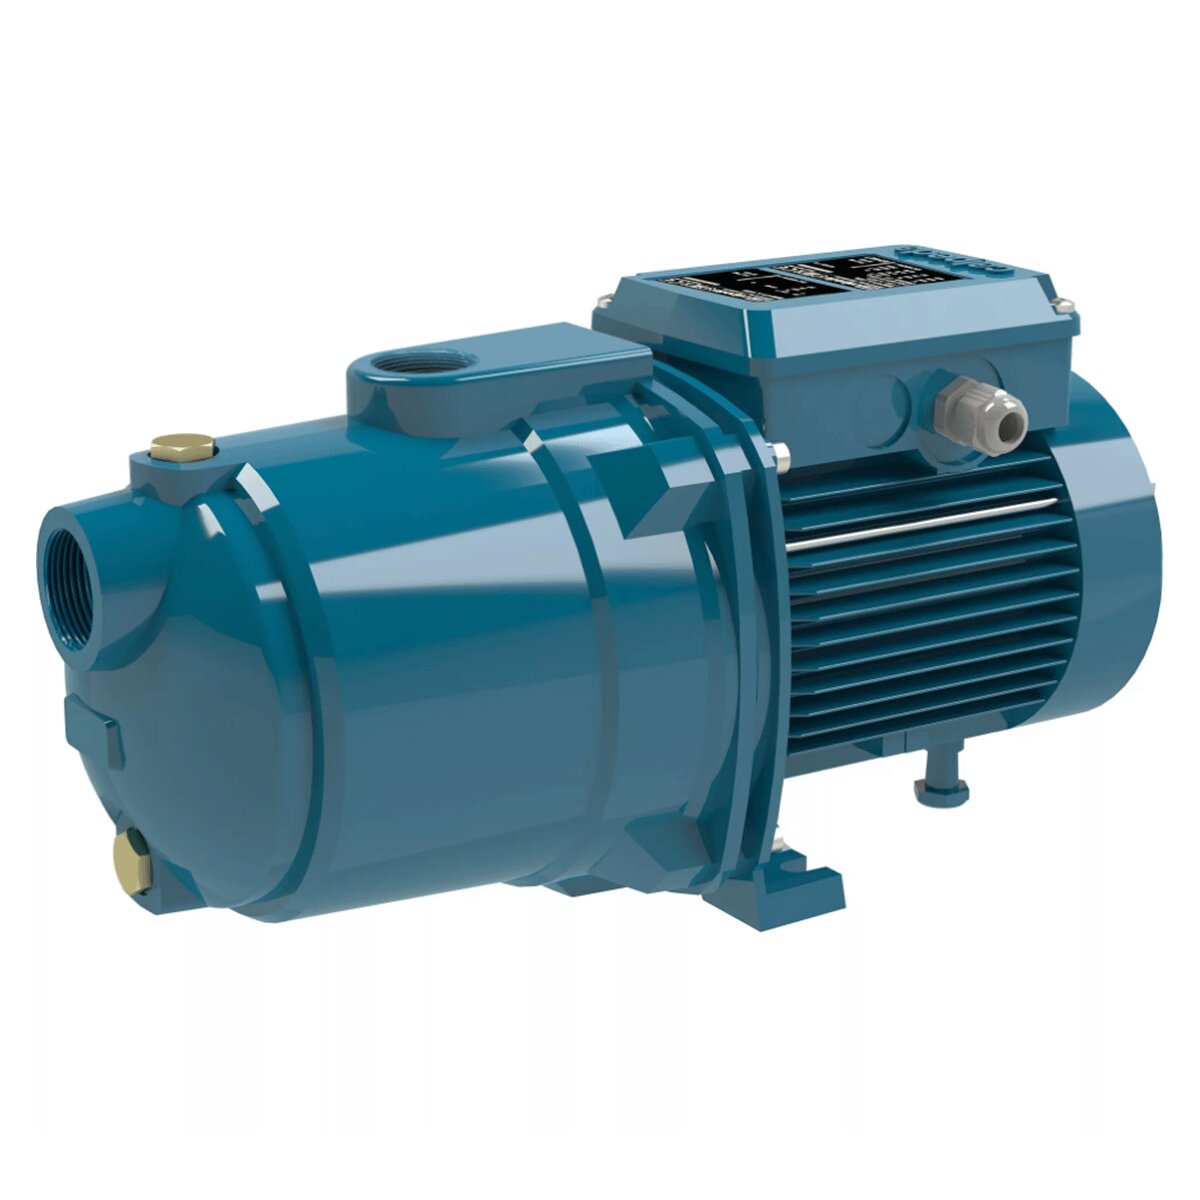 Calpeda NGLM 2/80/A self-priming pump with ejector 0.75 HP/0.55 kW